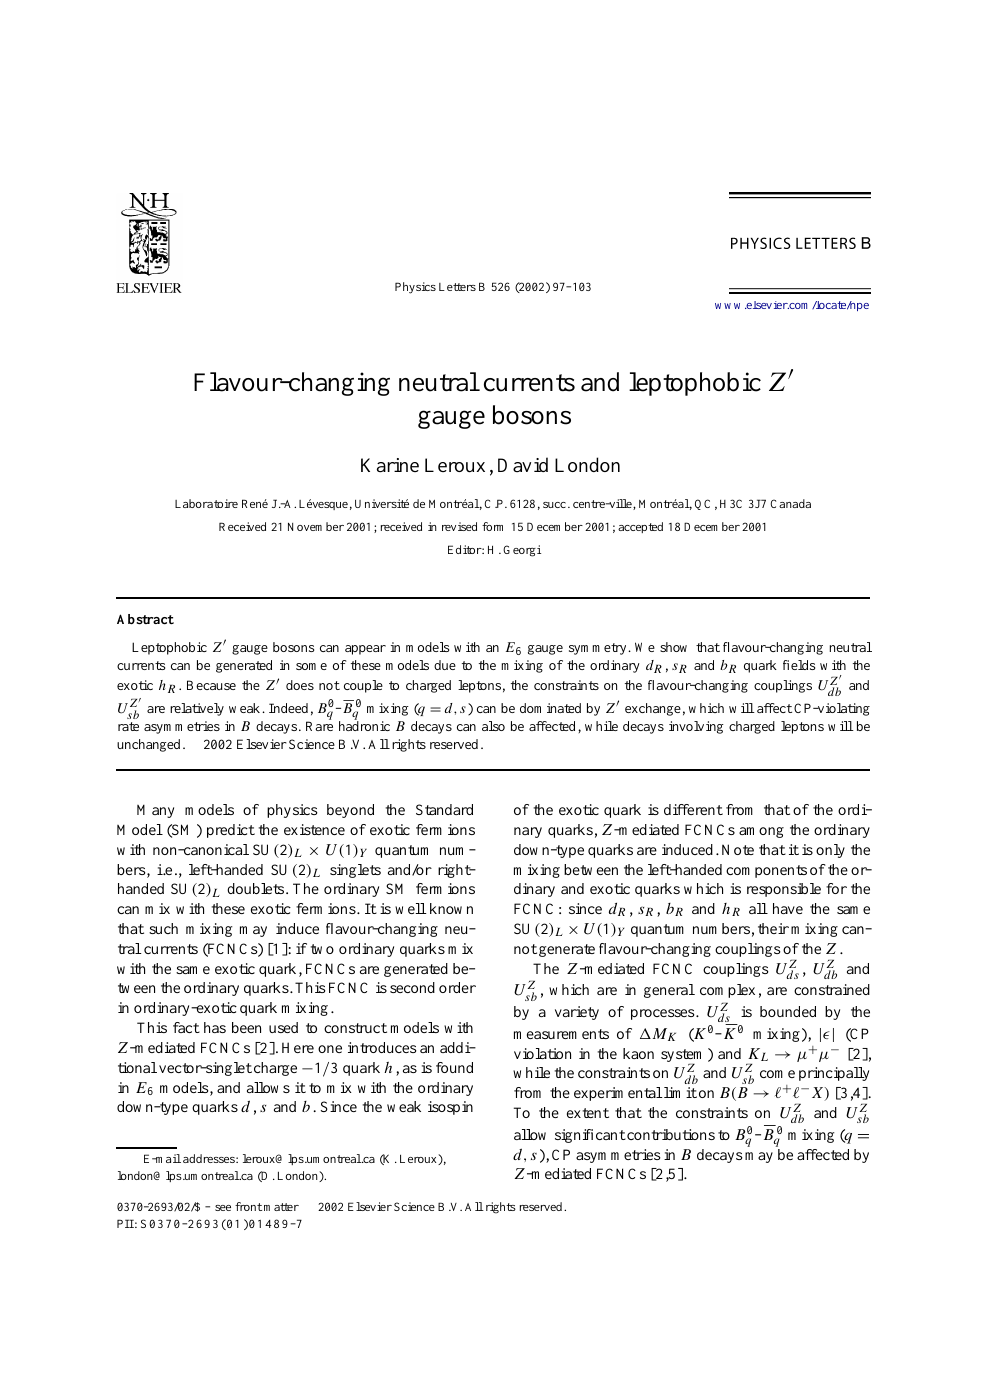 Flavour Changing Neutral Currents And Leptophobic Z Gauge Bosons Topic Of Research Paper In Physical Sciences Download Scholarly Article Pdf And Read For Free On Cyberleninka Open Science Hub